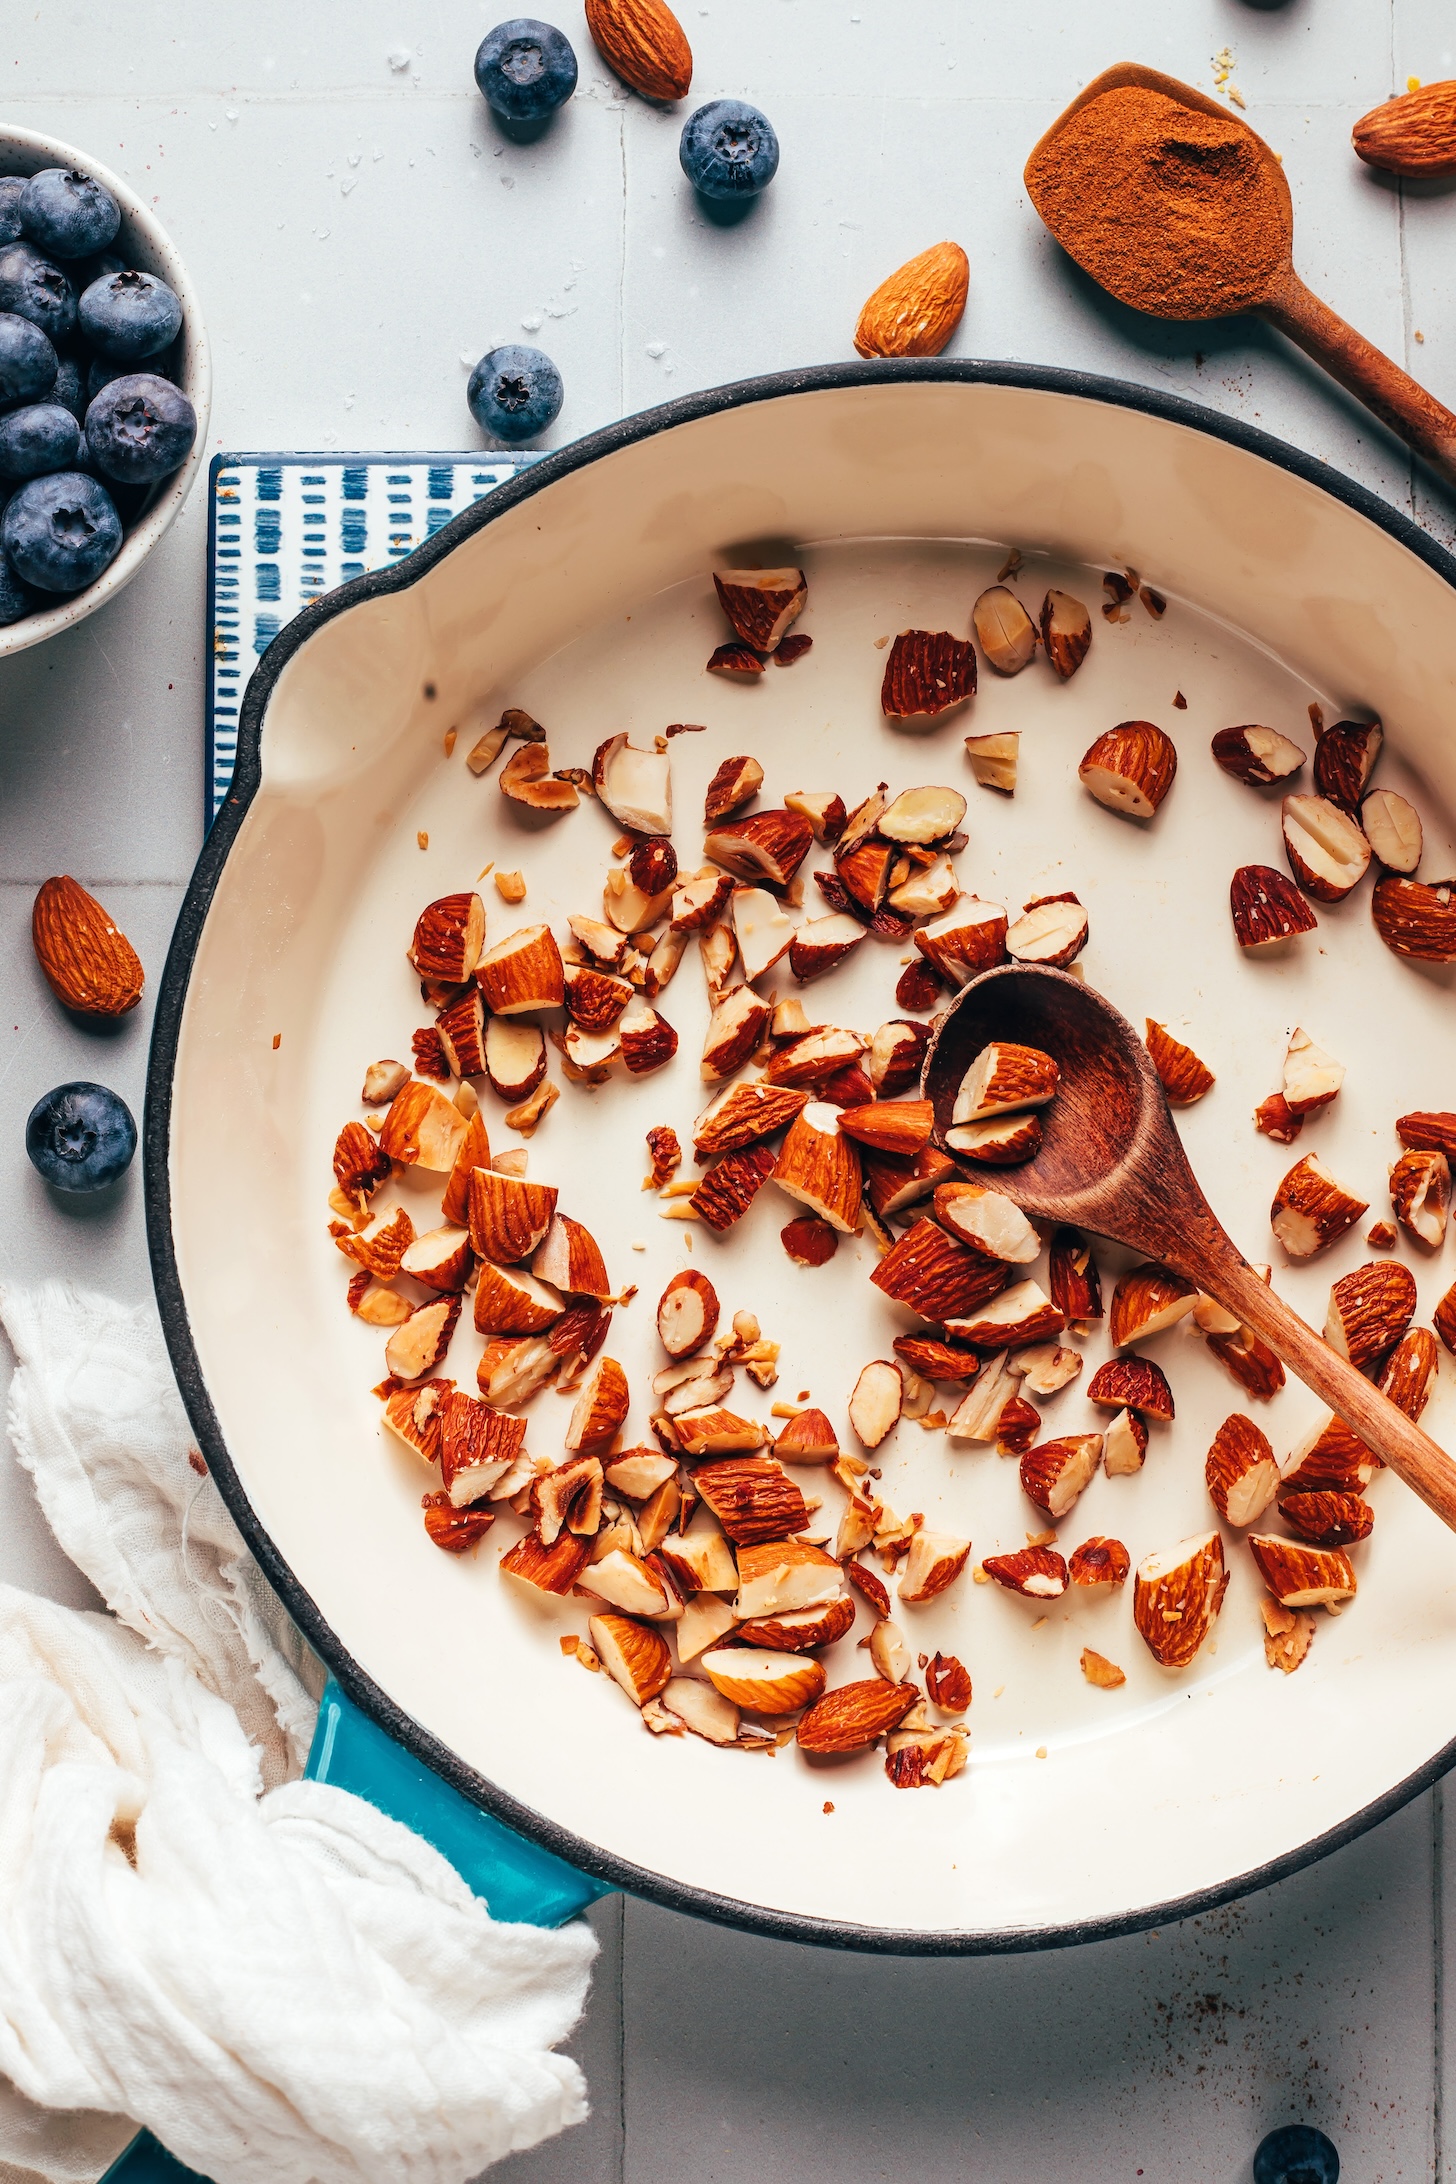 Toasting almonds in a ceramic-coated cast iron skillet